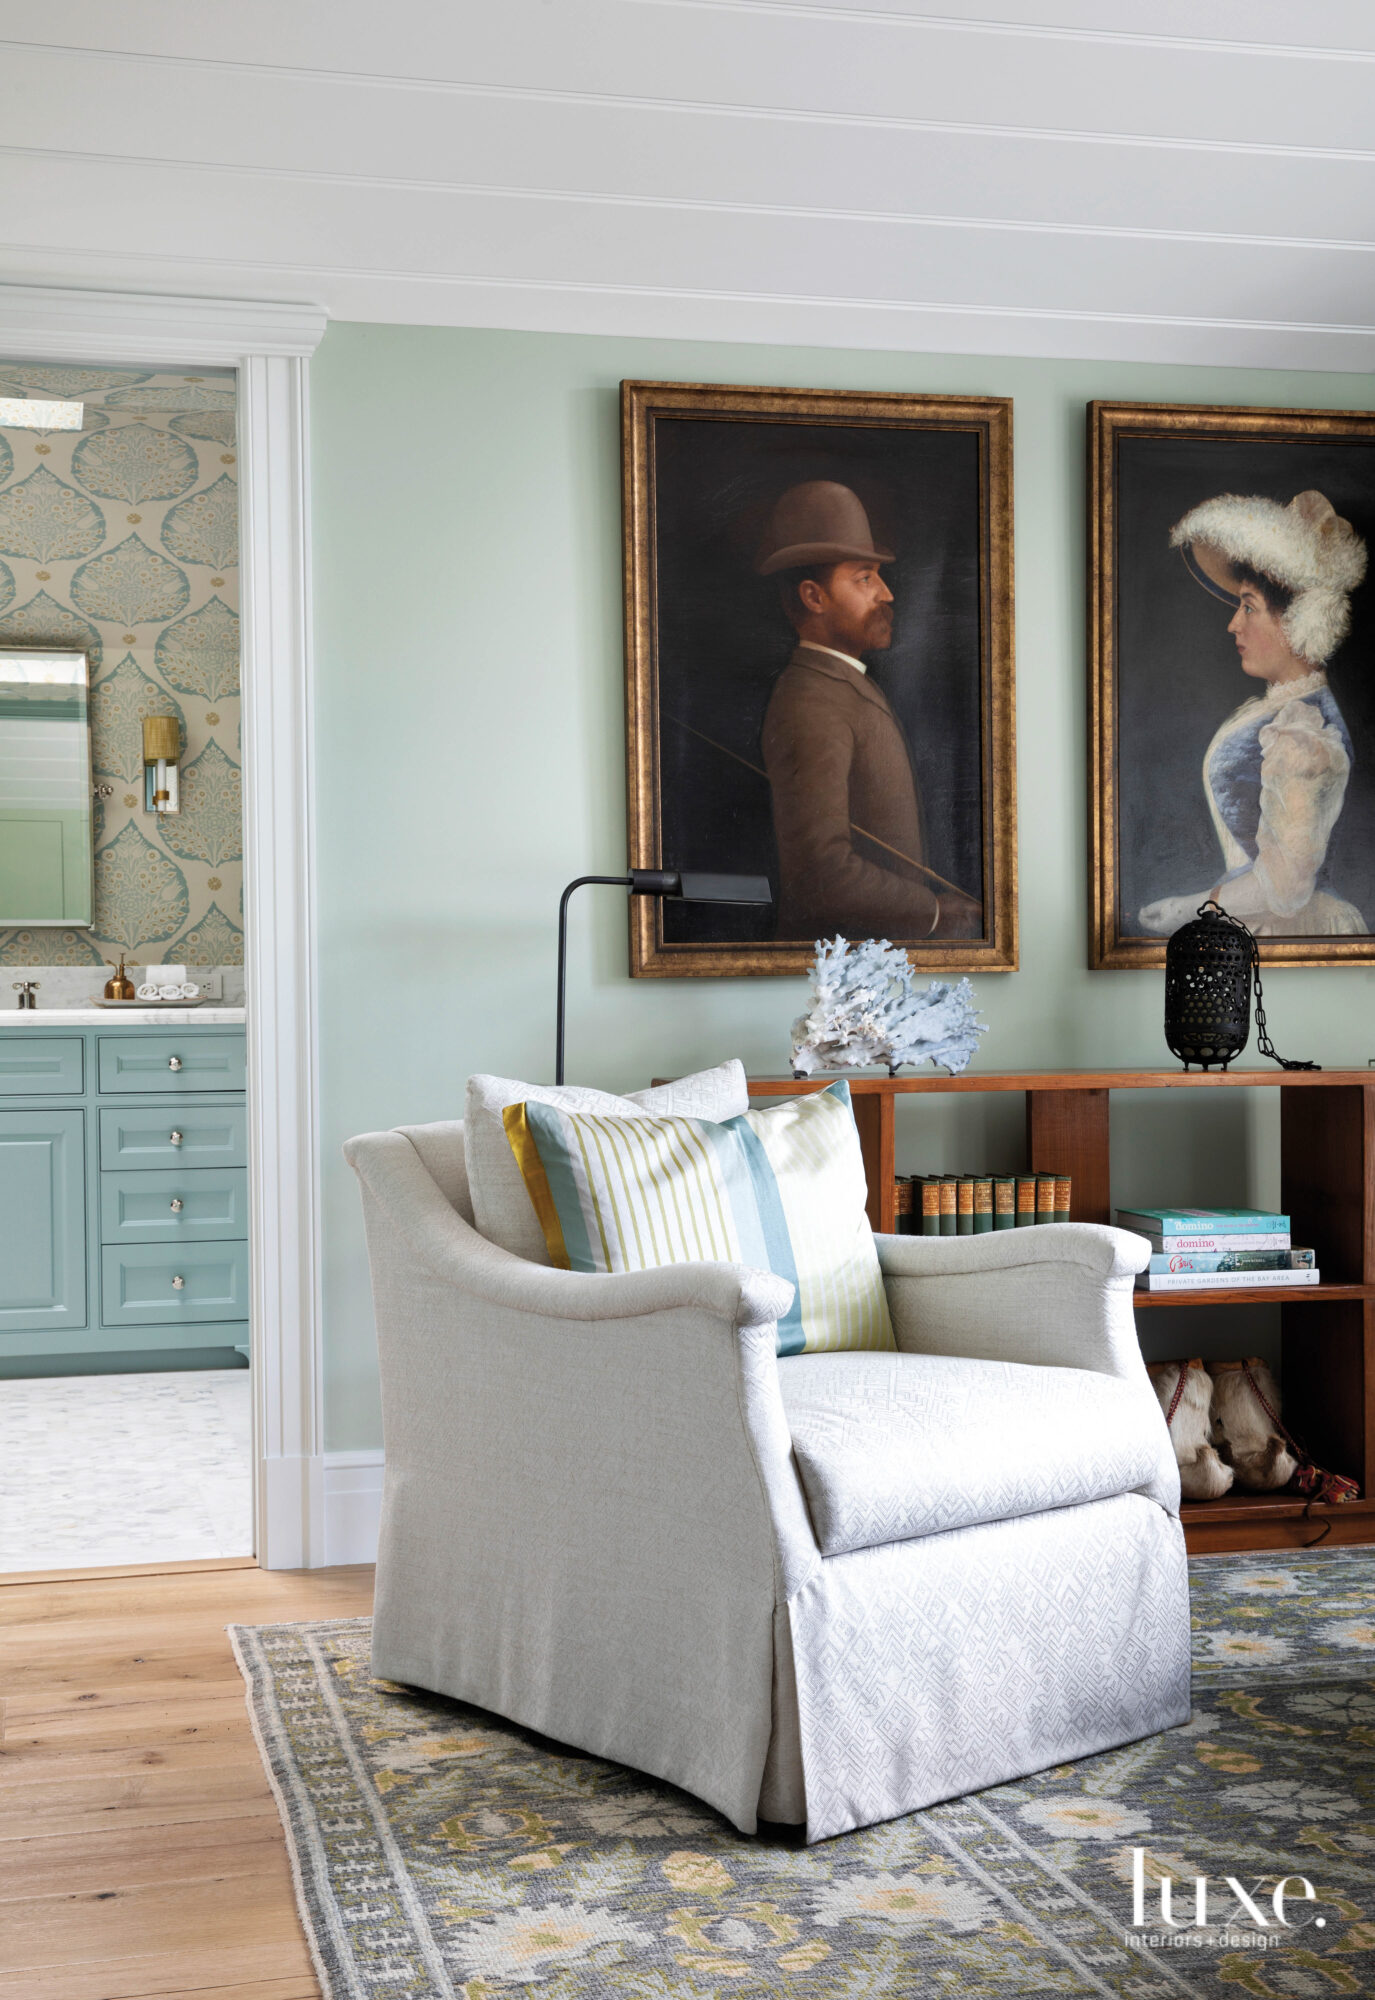 Two portraits of a male and female and a comfortable armchair are found in the master bedroom.